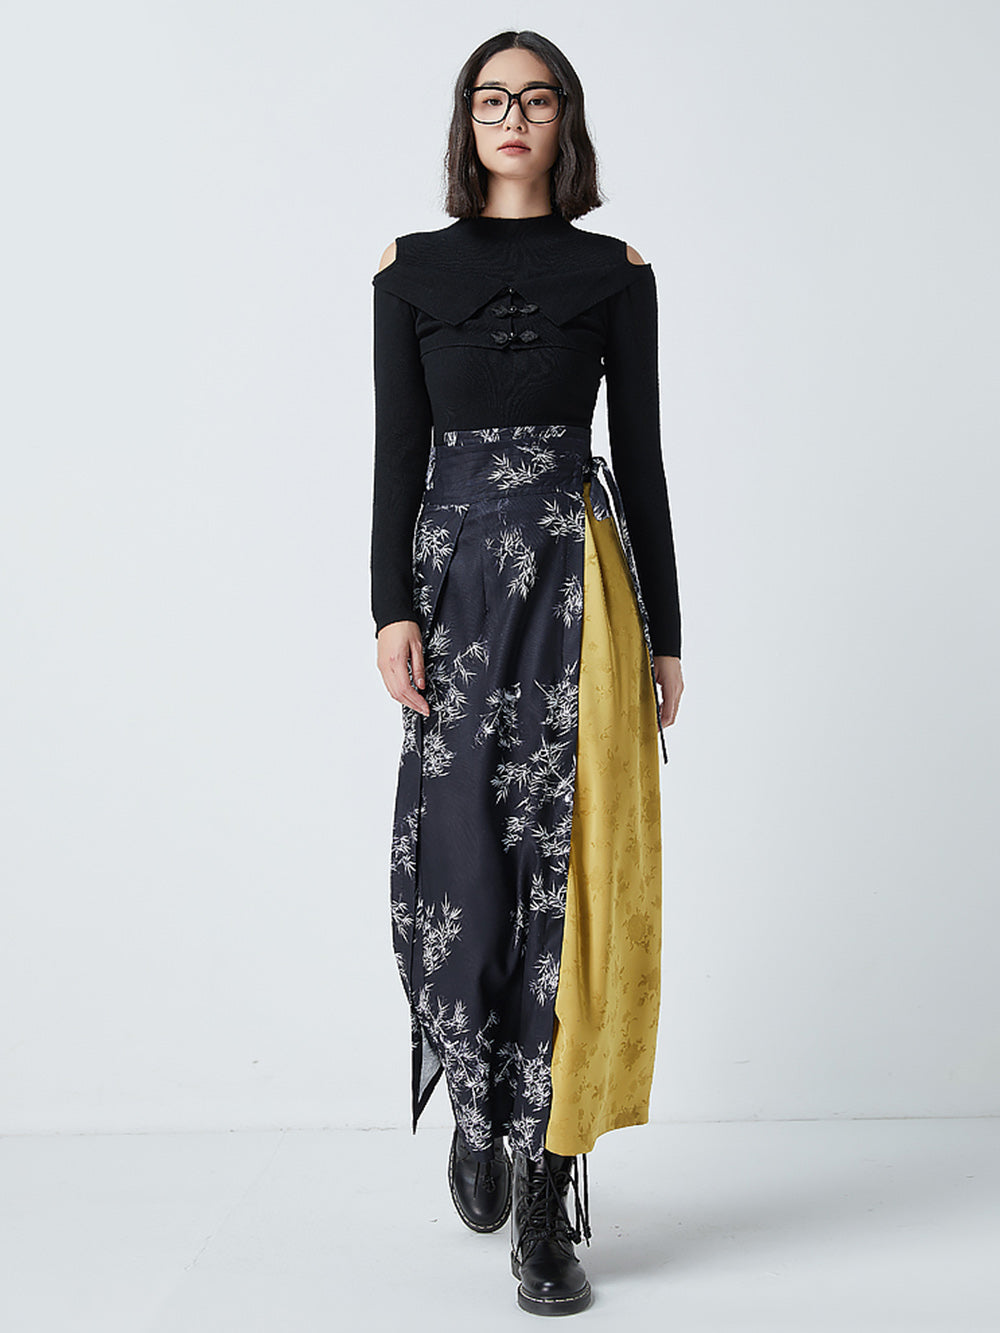 MUKTANK x CUUDICLAB Contrasting Color Song Dynasty-style Pleated Skirt